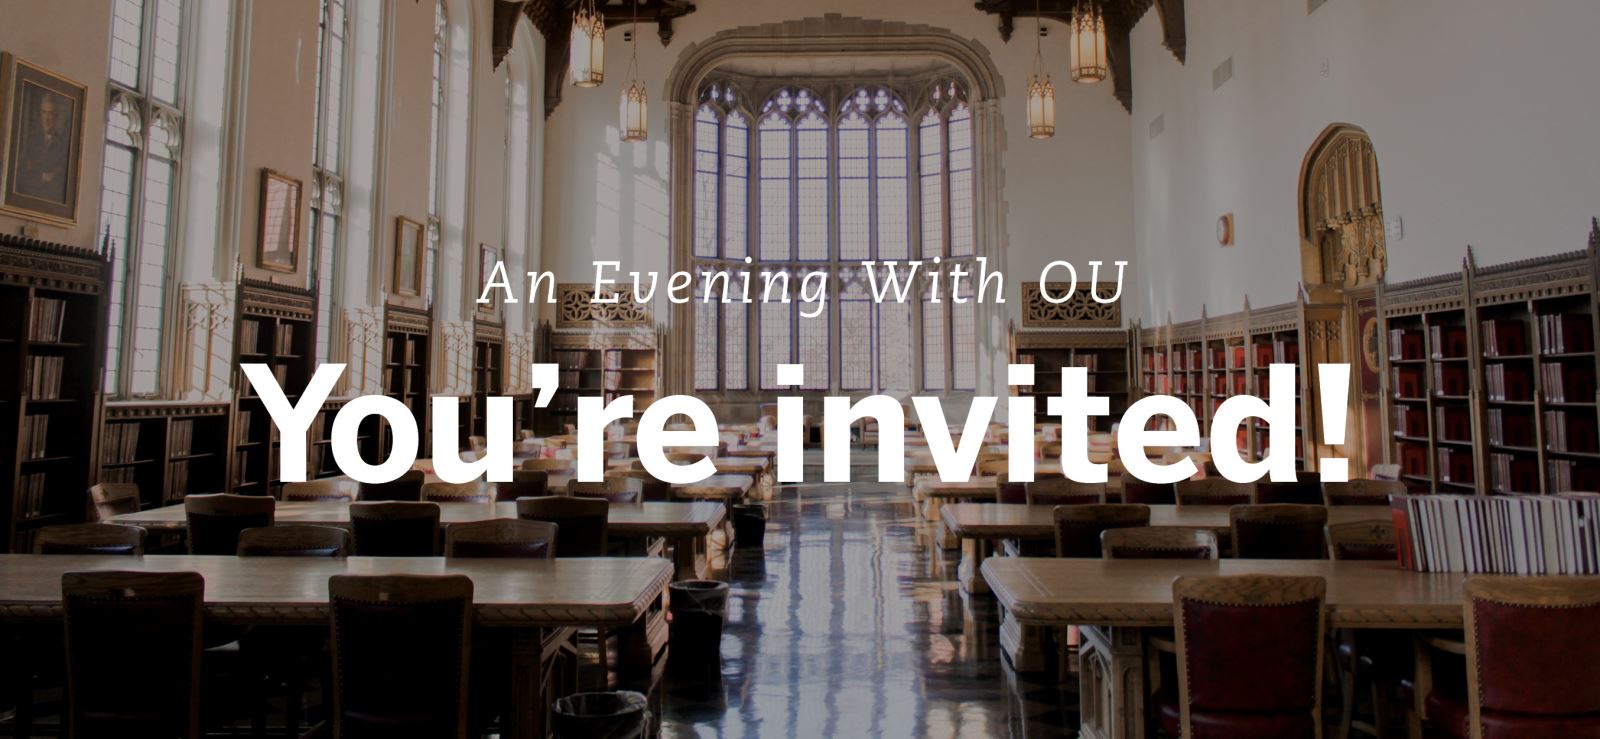 An Evening with OU: You're Invited